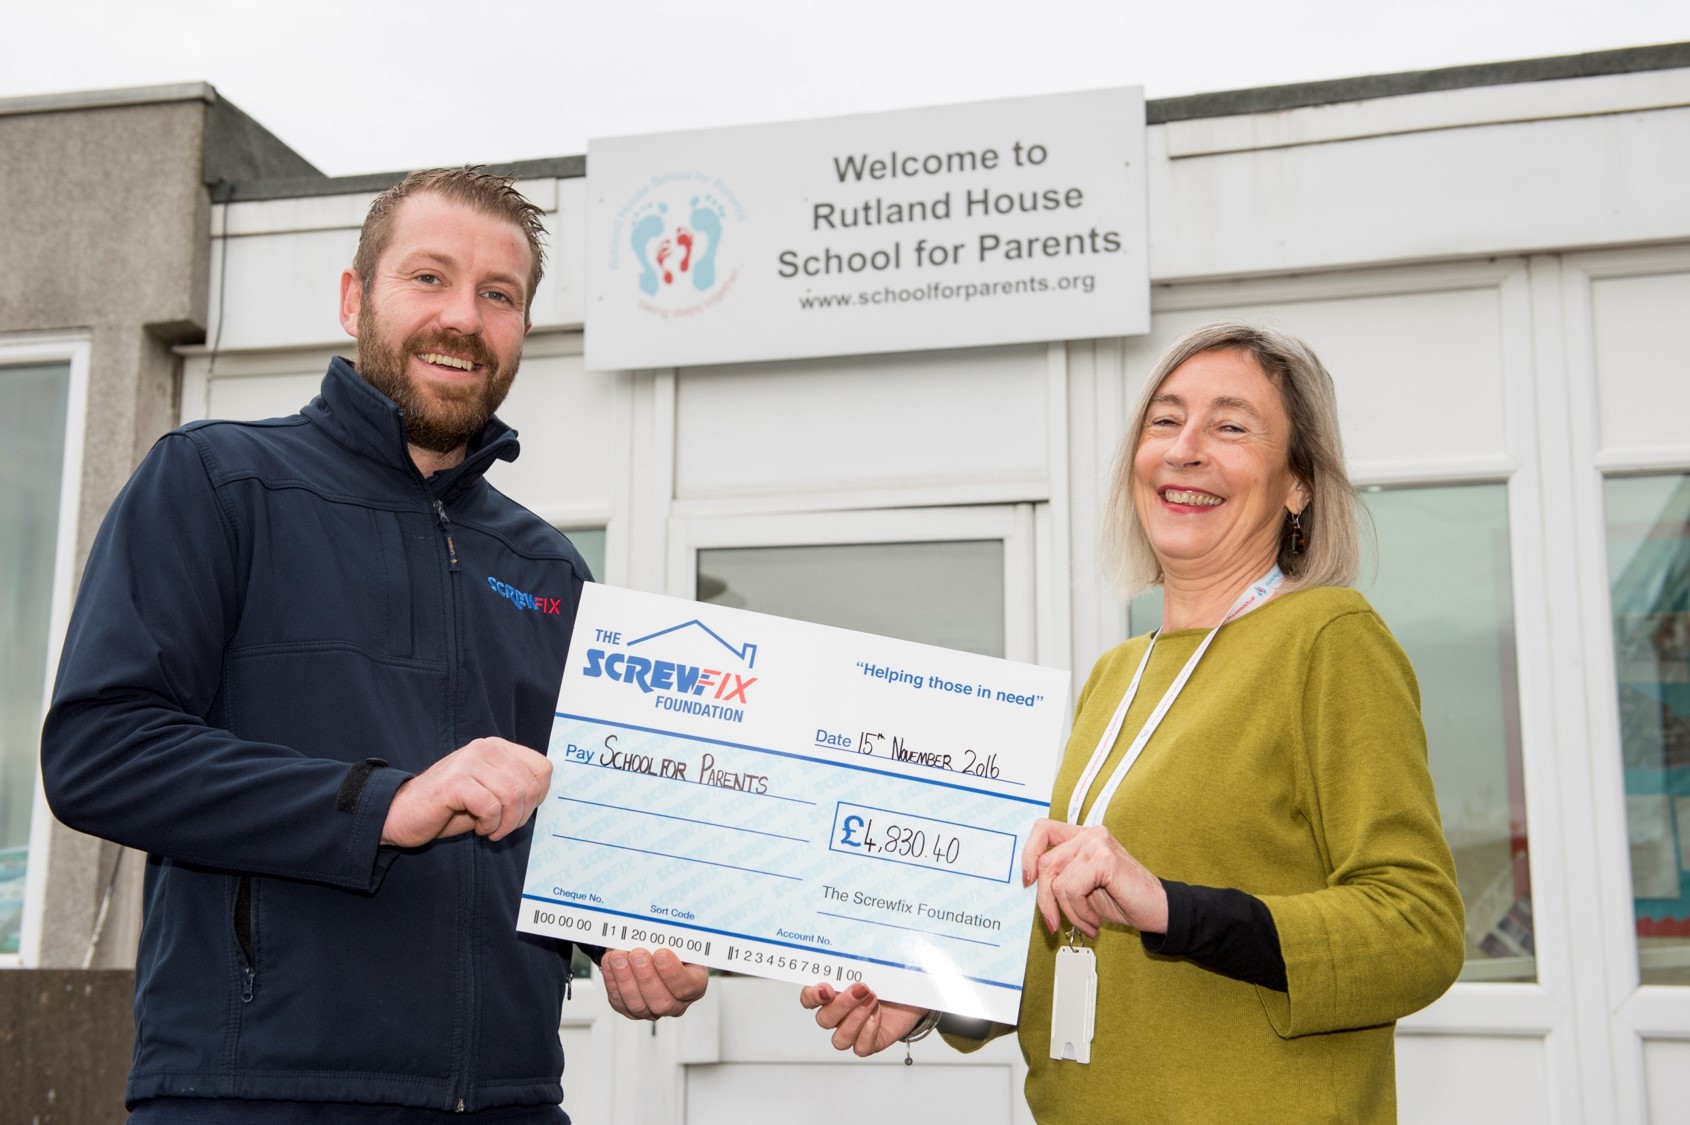 The Screwfix Foundation supports School for Parents in Nottingham